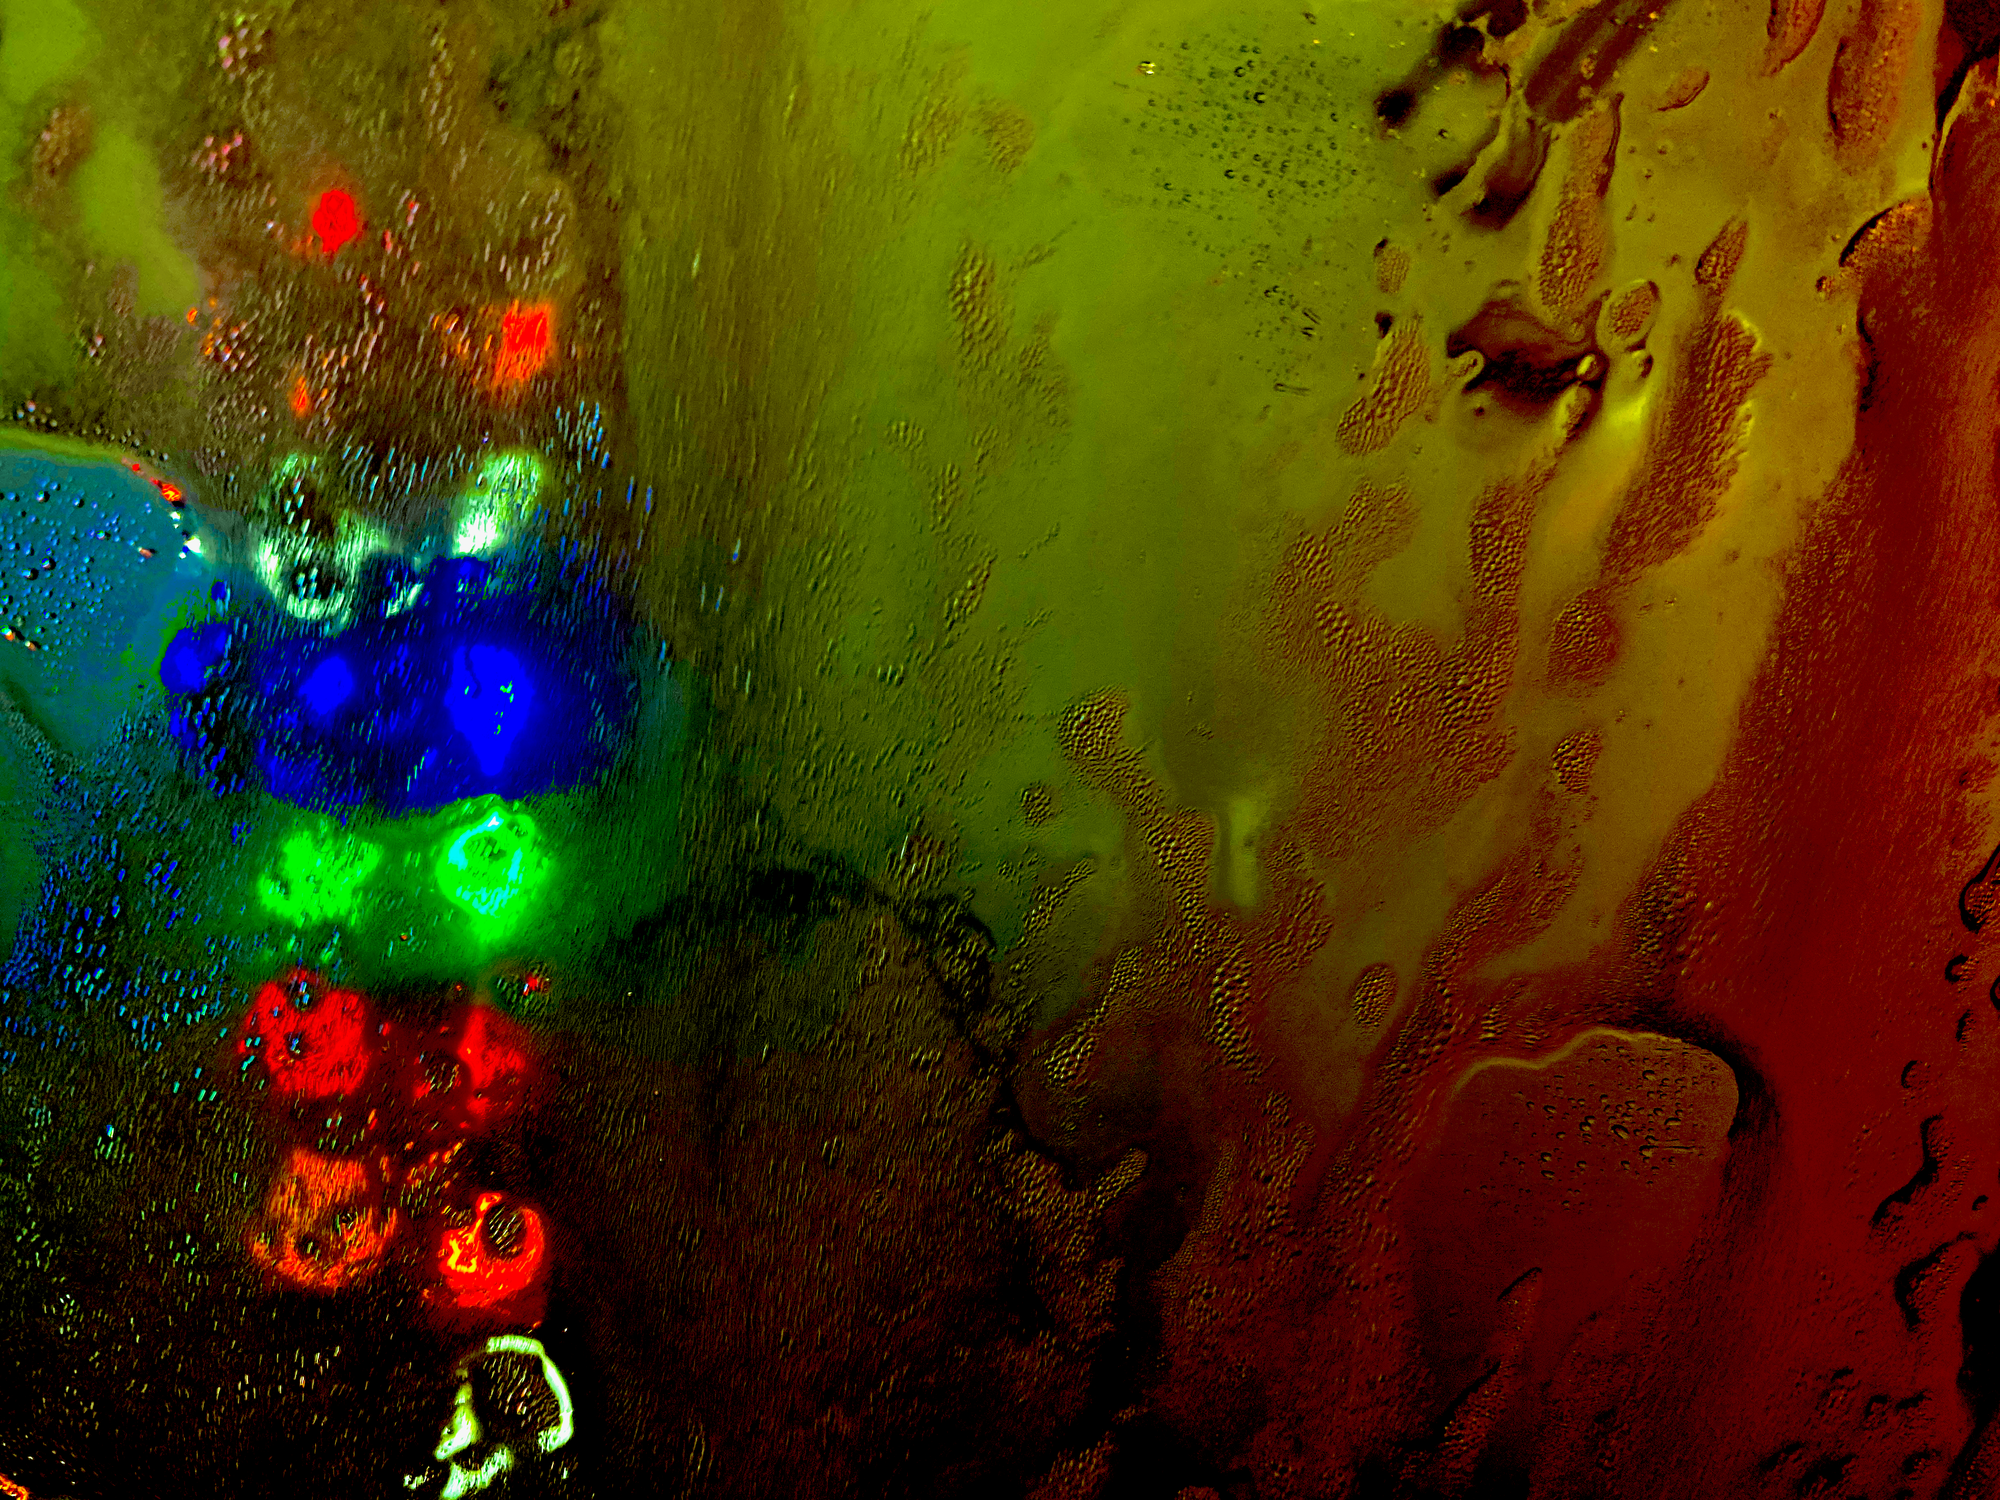 Foamy water and red-blue-green colored-stoplight as seen from a car’s windshield glass.